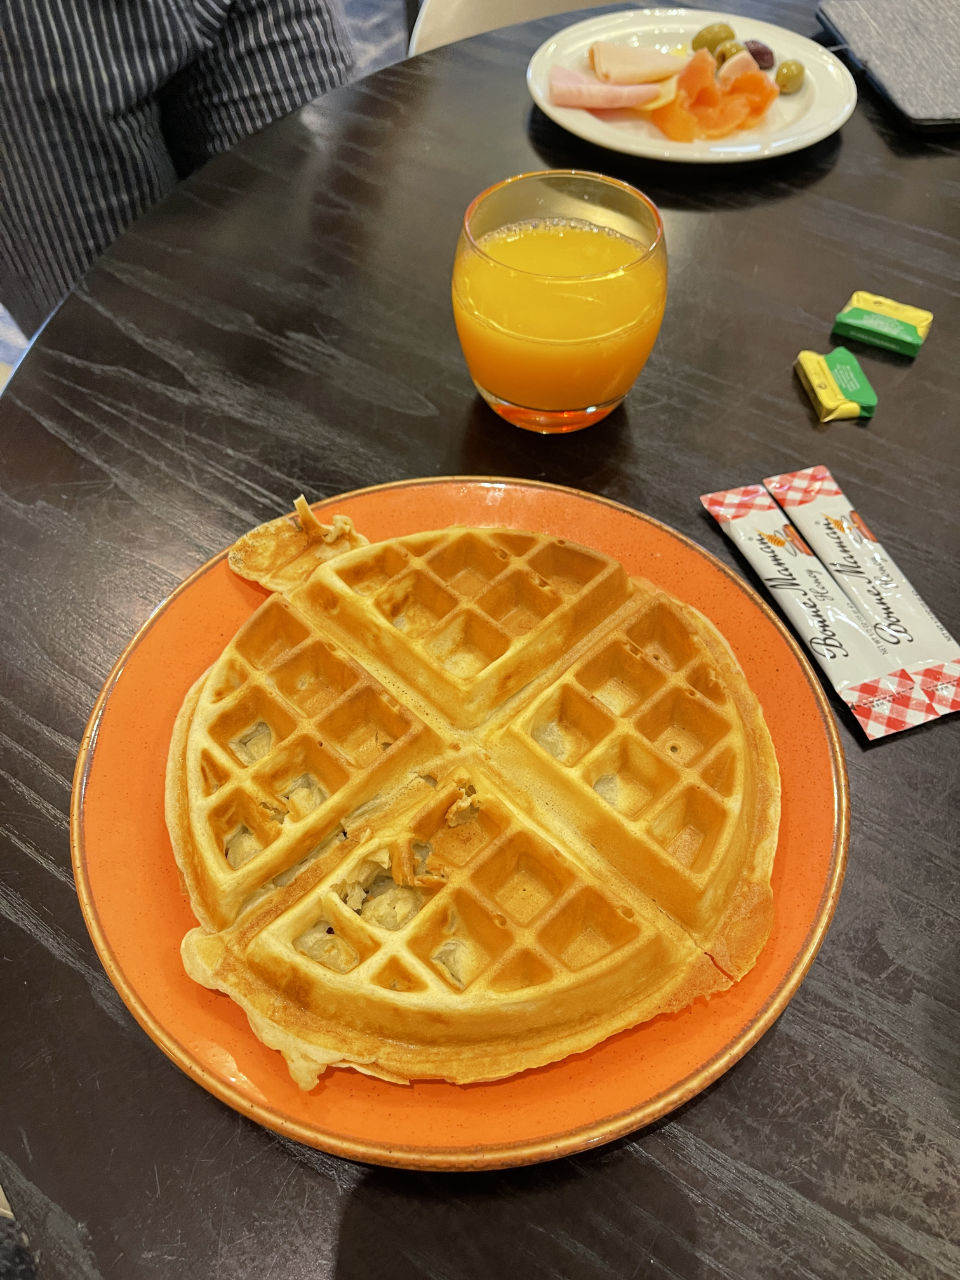 Made our own Waffle